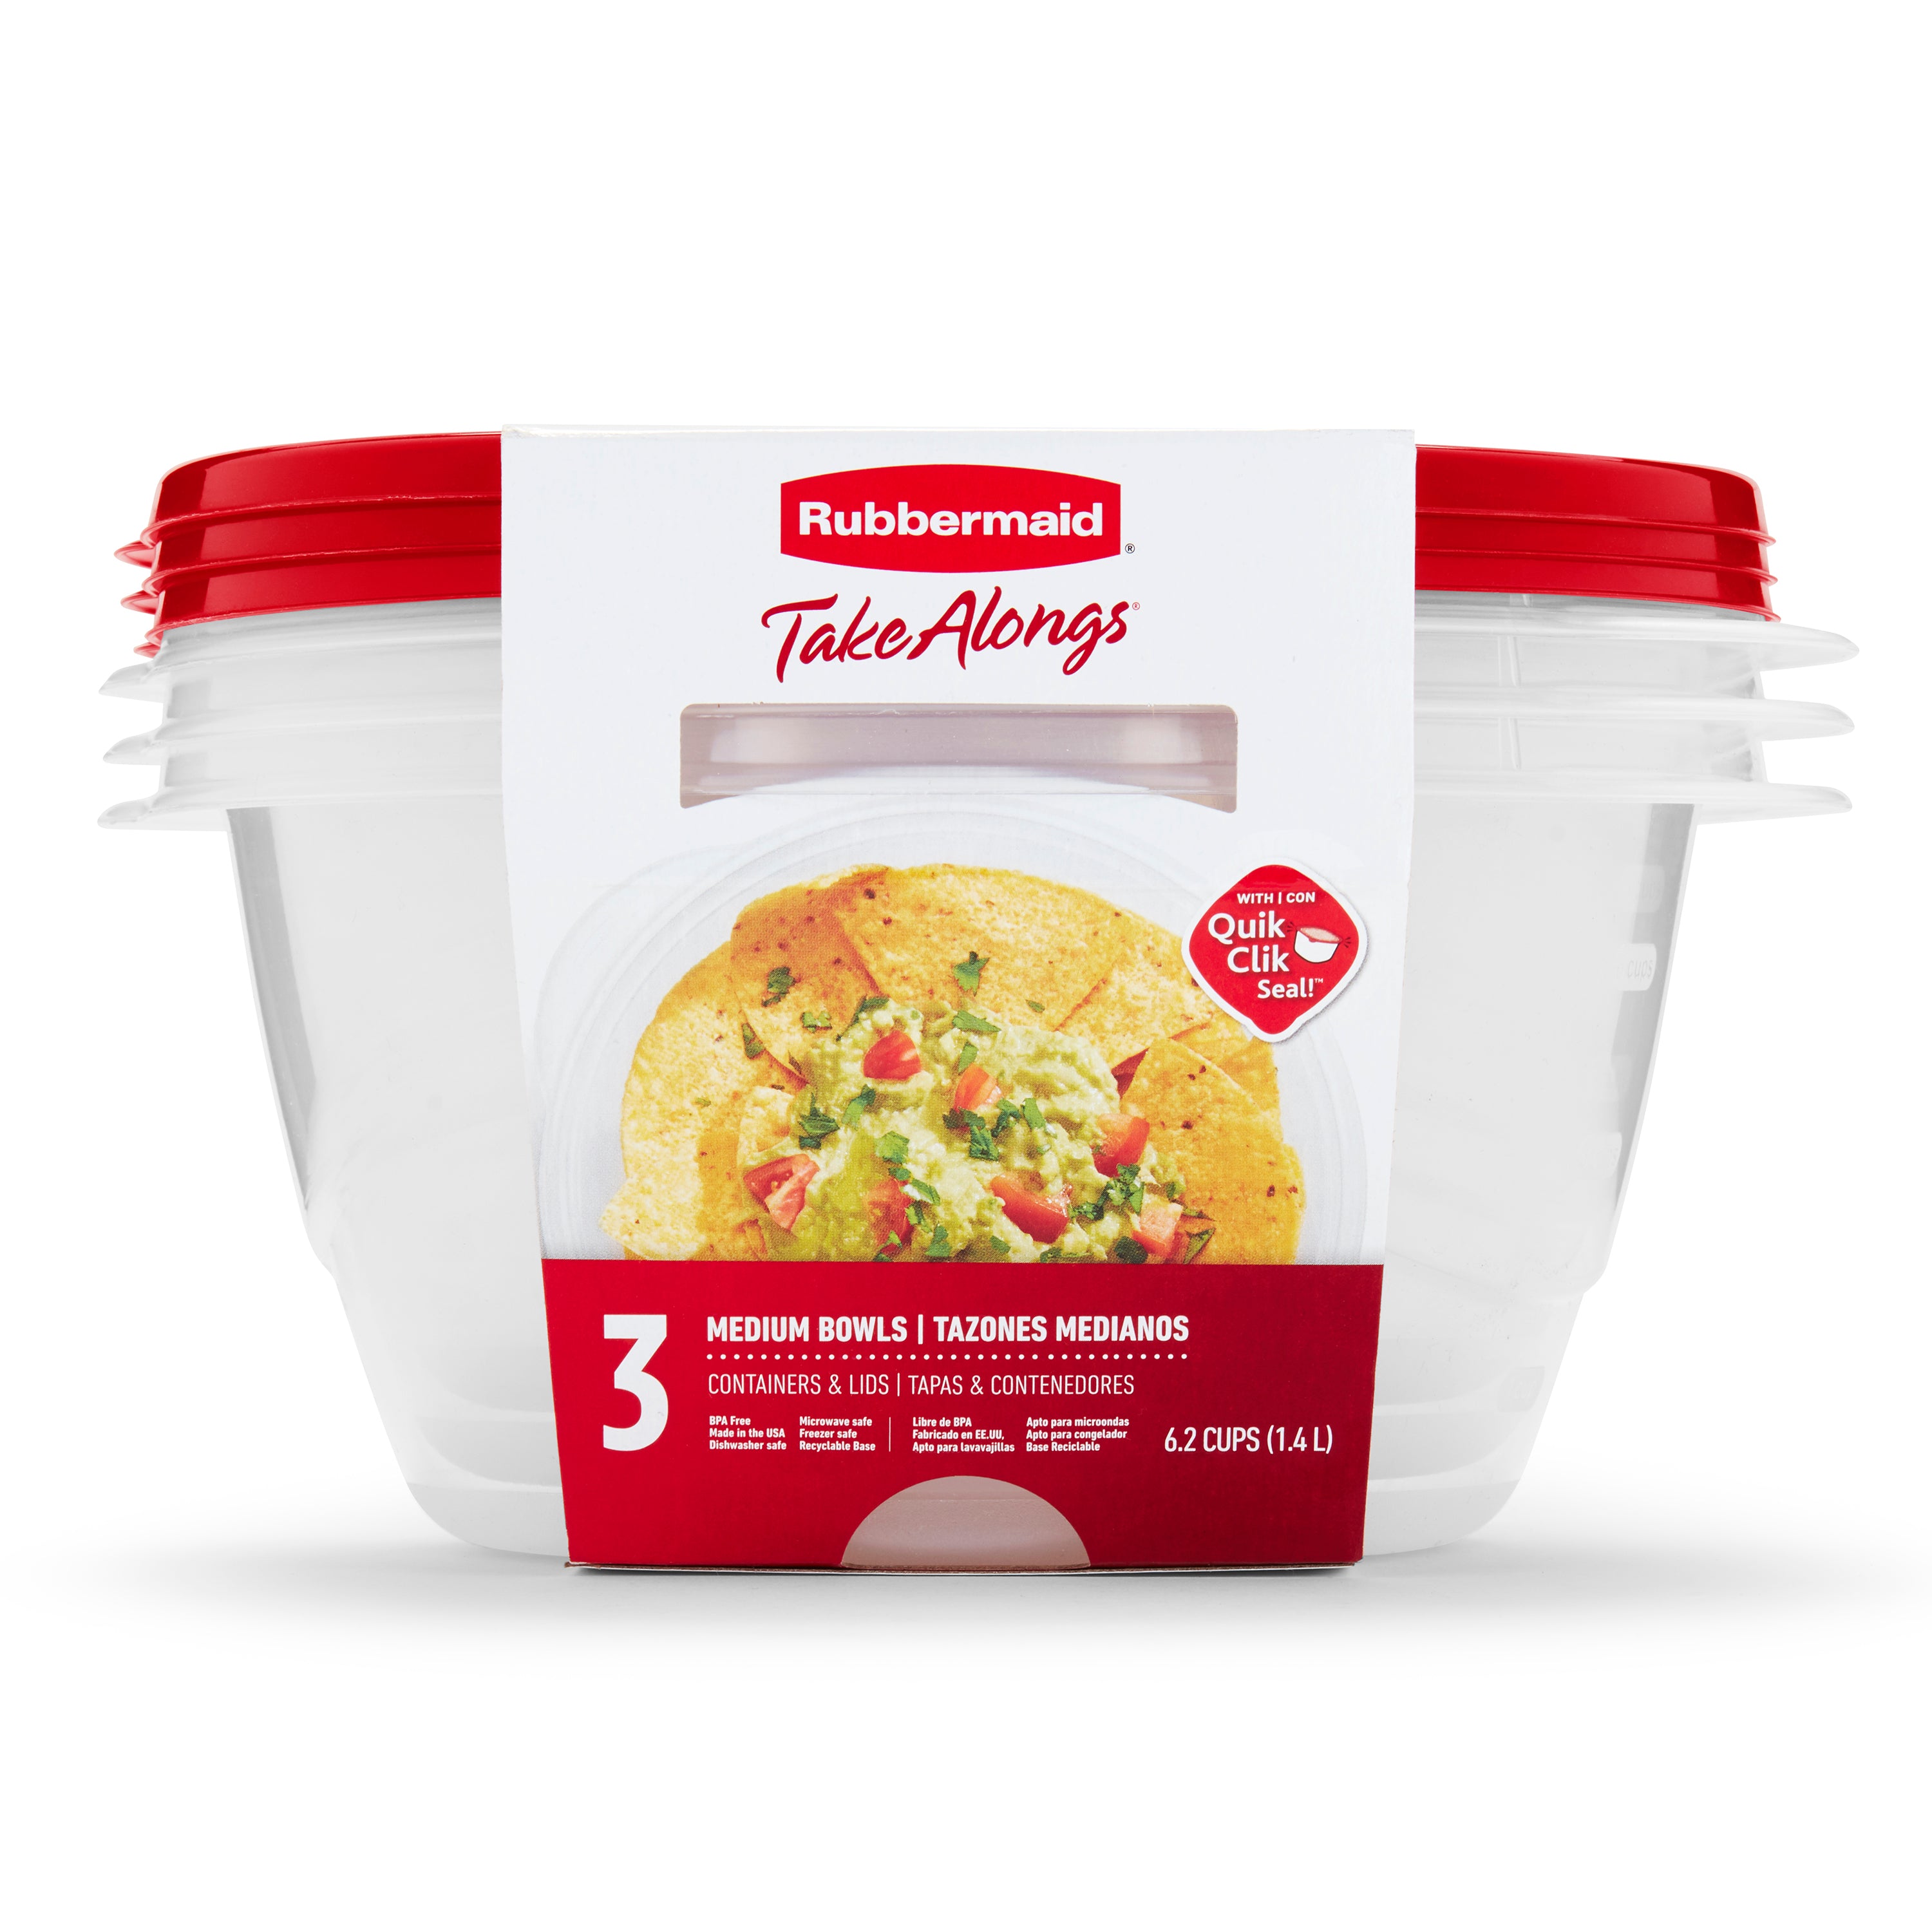 Rubbermaid - Rubbermaid, Take Alongs - Containers & Lids, Deep Squares (4  count), Shop